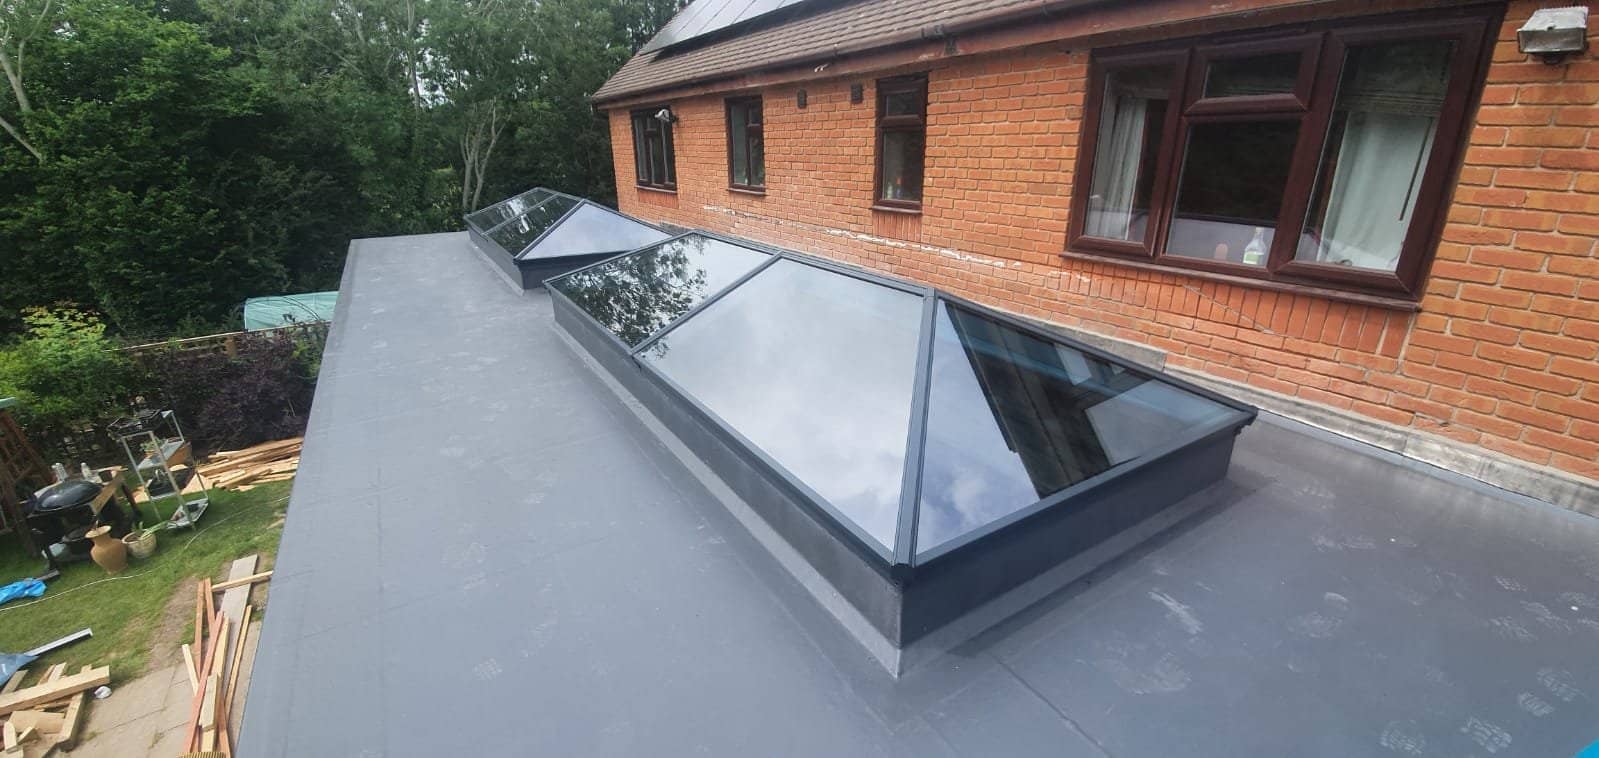 Grp Roofing Manchester